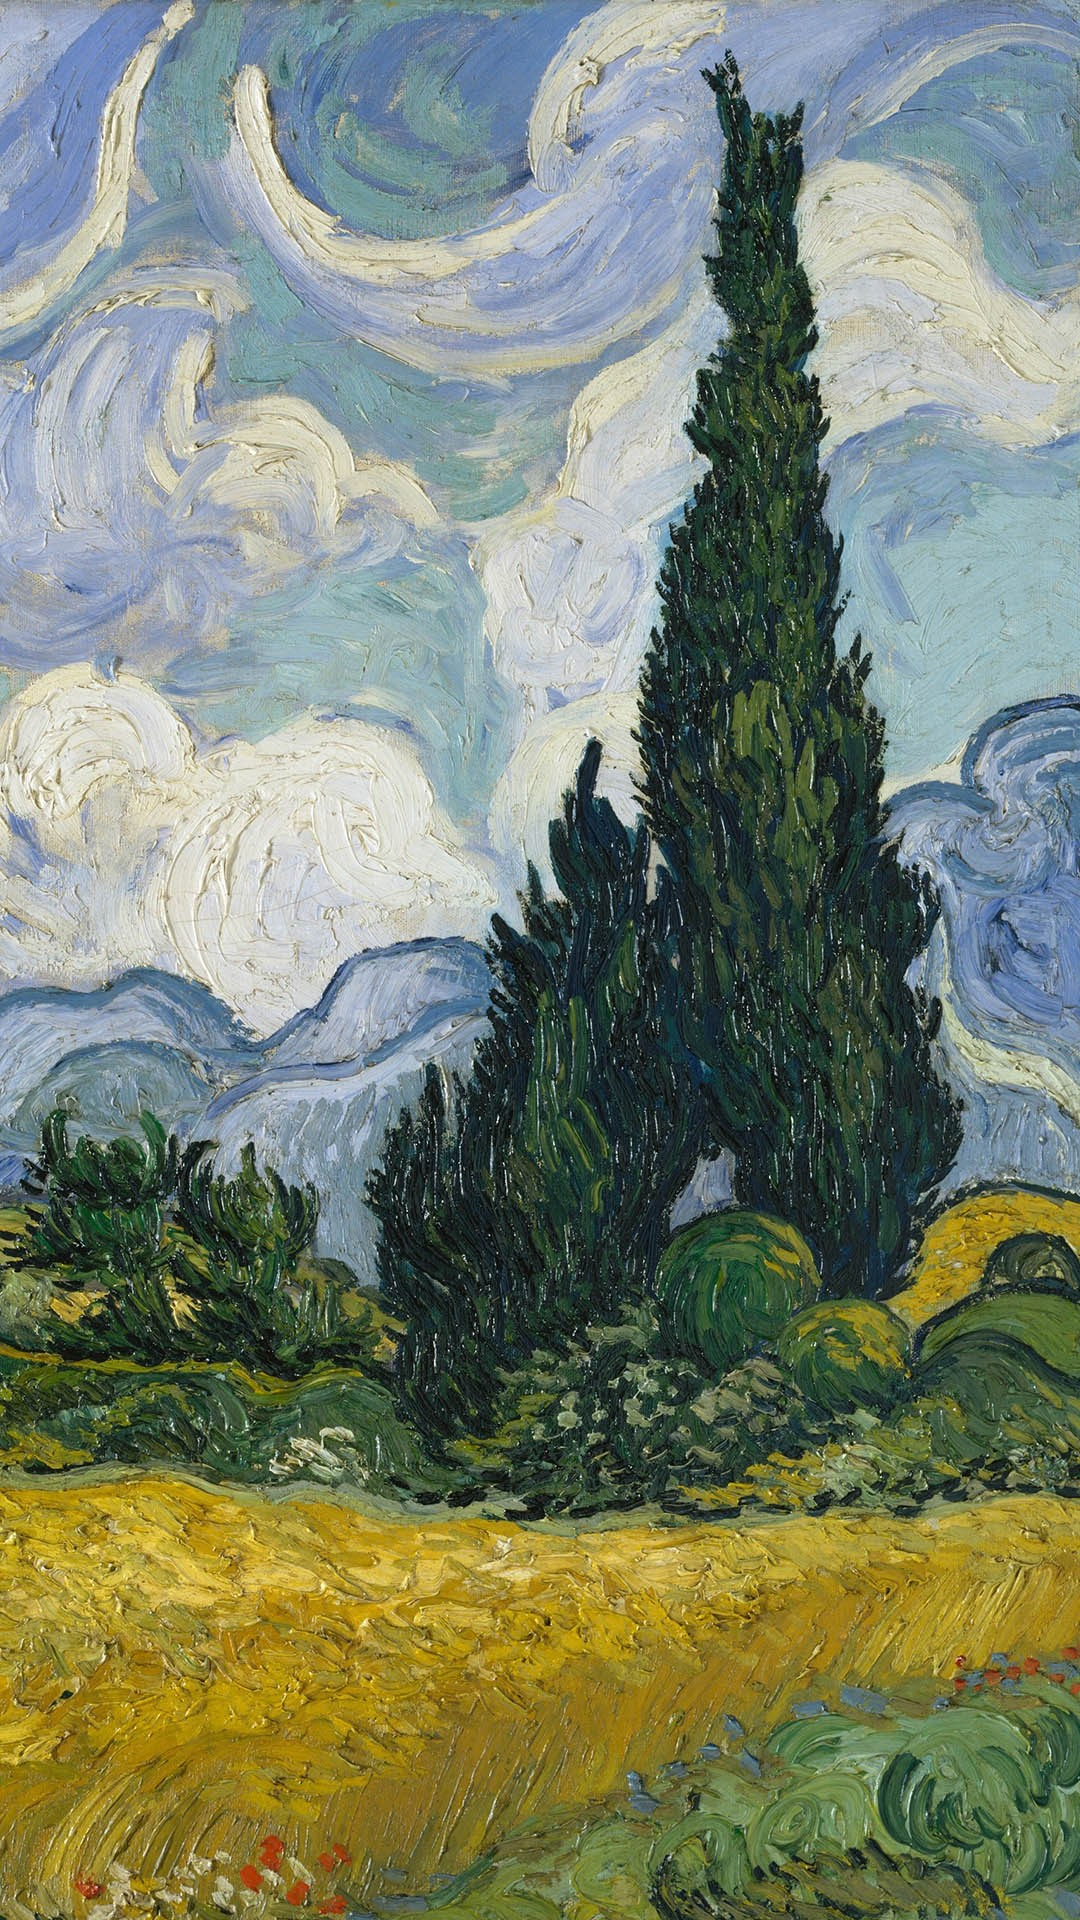 1080x1920 Wheat Field with Cypresses, 1889, painting by Vincent van Gogh | Windows 10 Spotlight Images